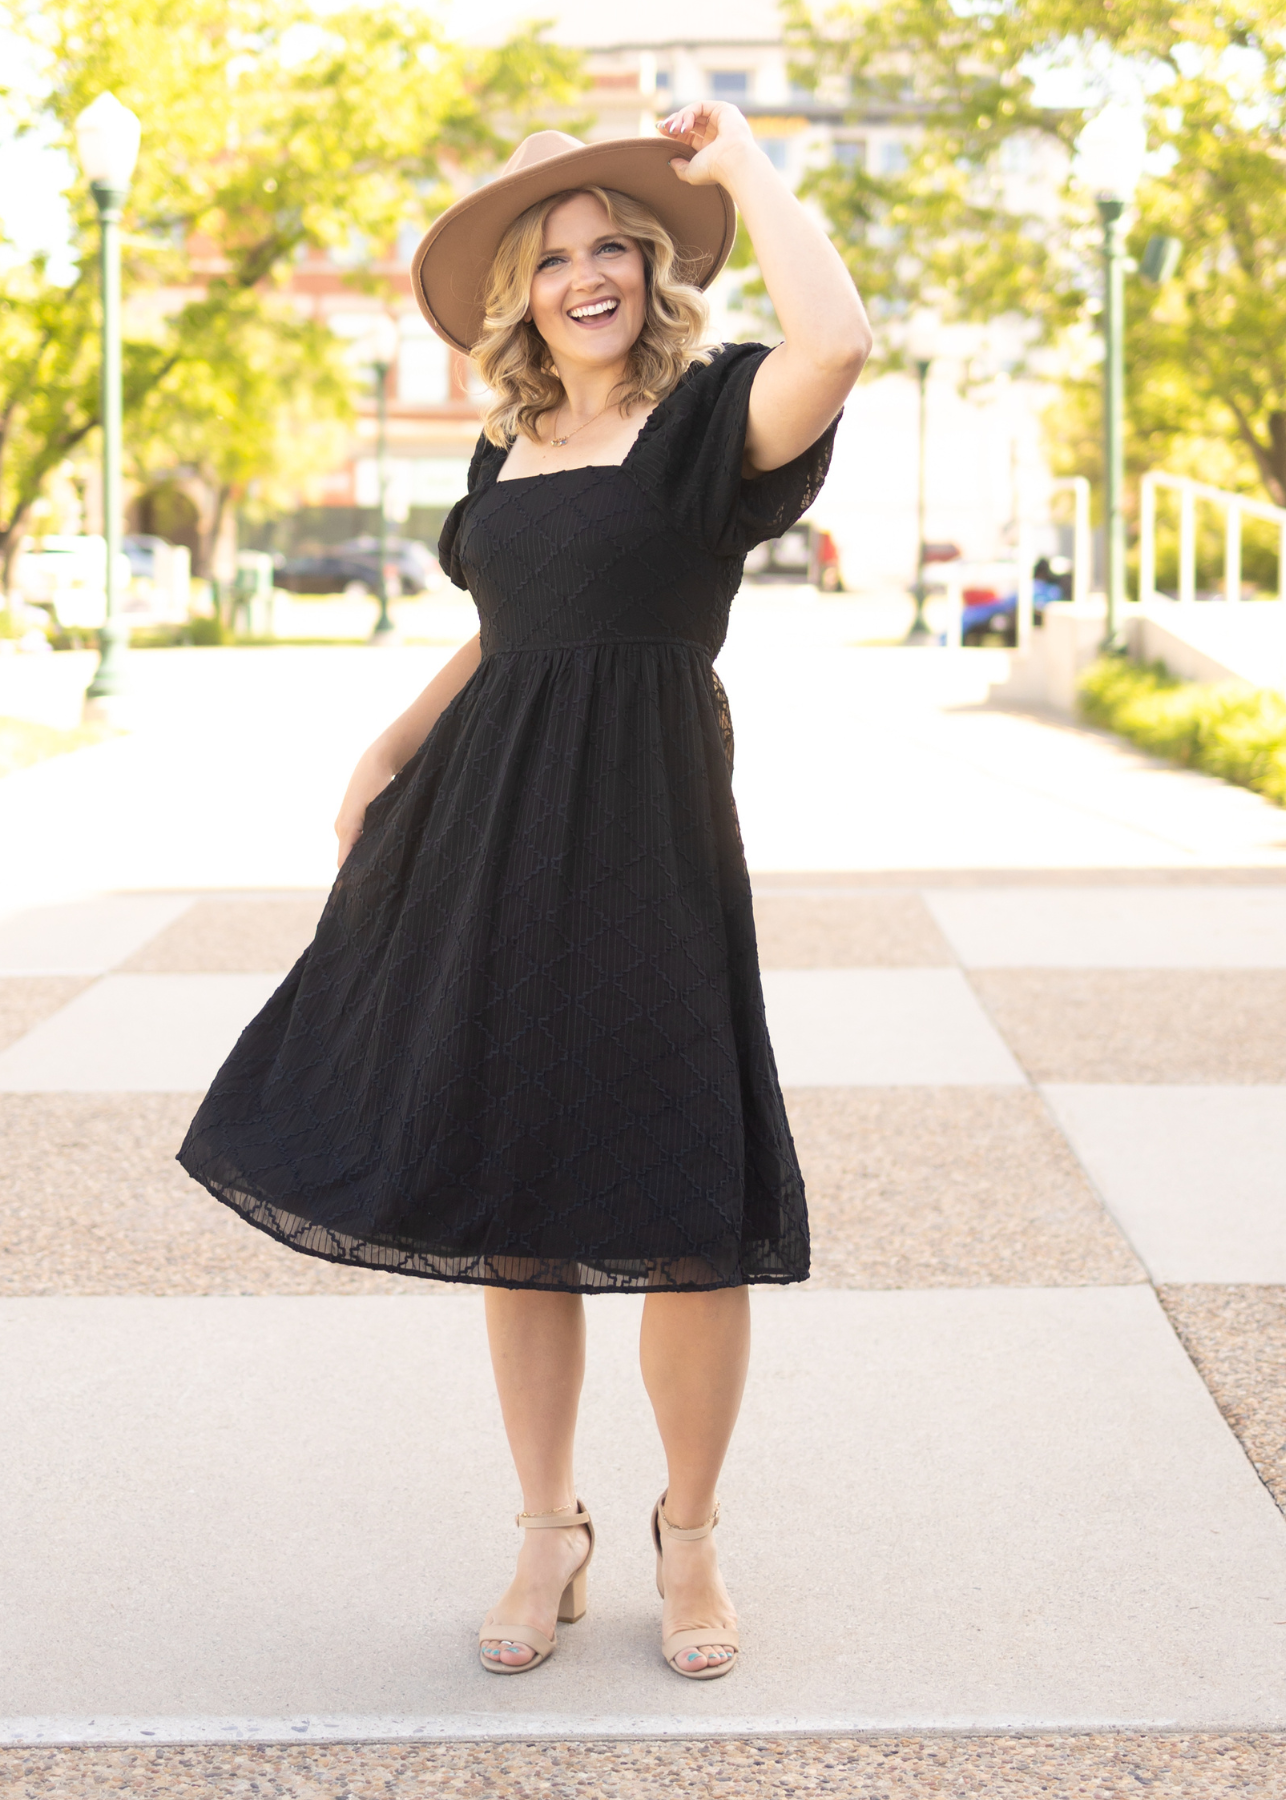 Short sleeve black dress with square neck